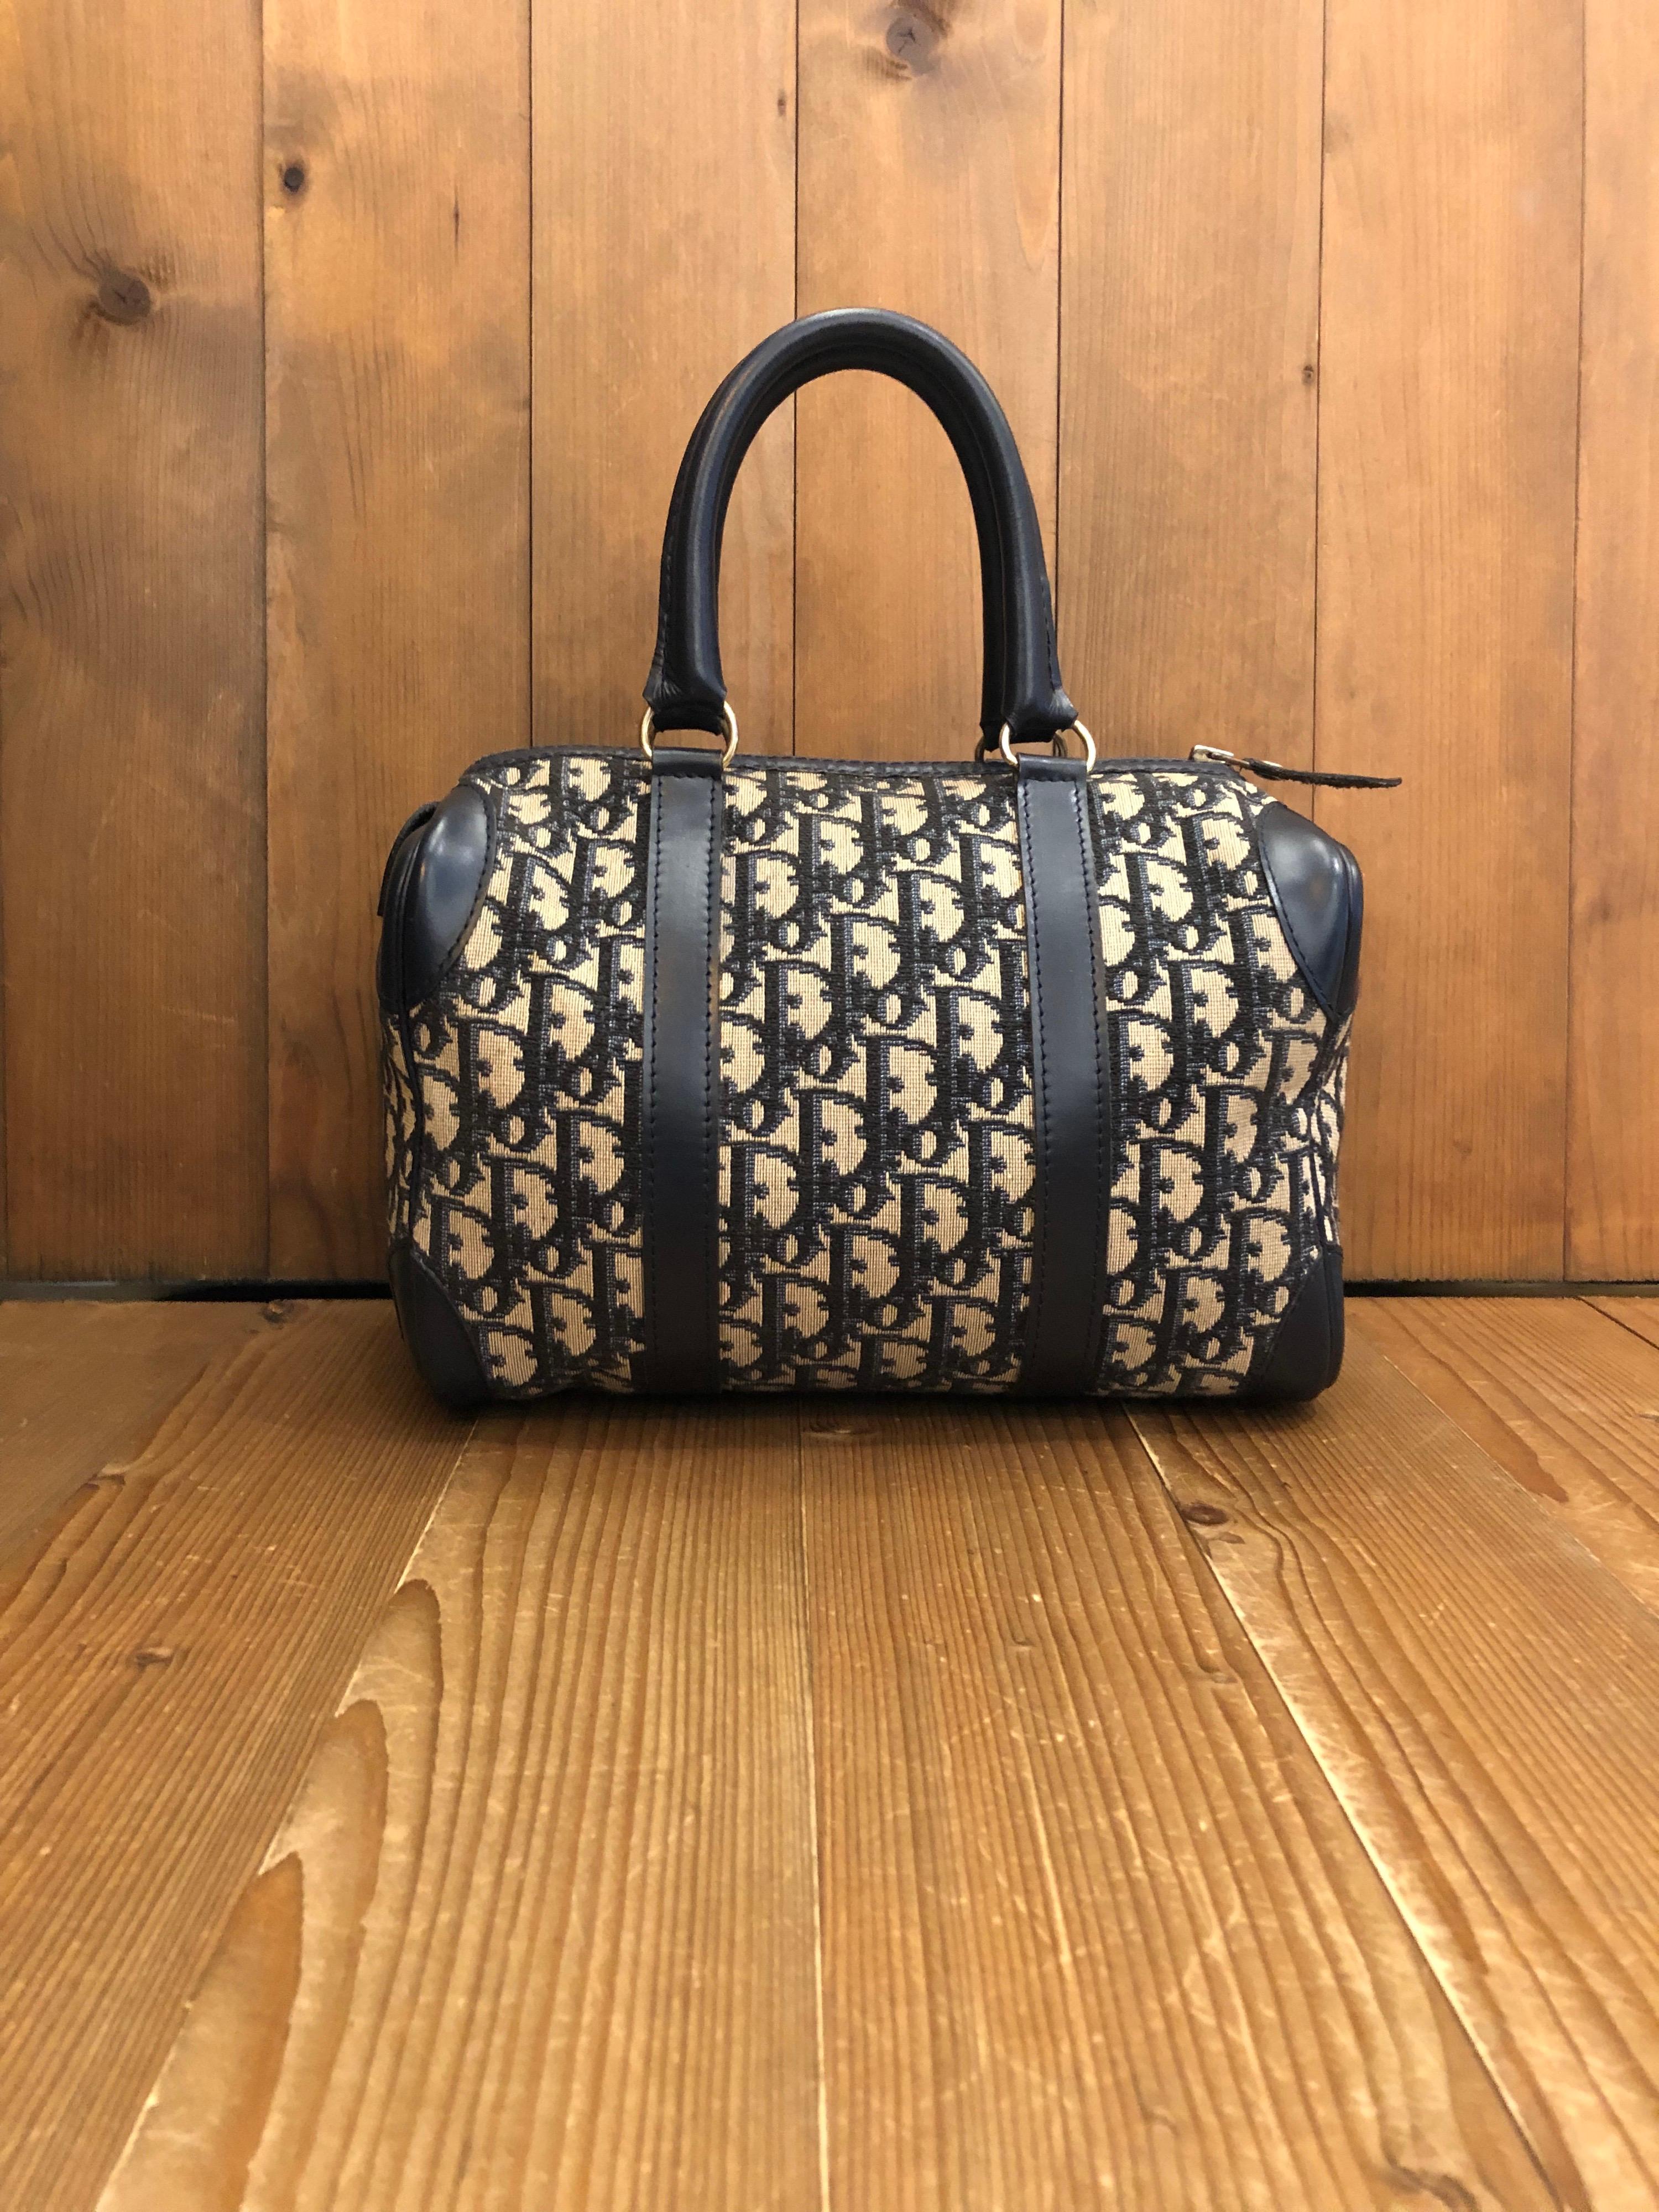 1970s CHRISTIAN DIOR small boston bag in navy trotter jacquard with leather trimmings. Made in France. Measures 10 x 7 x 5.5 inches handle drop 5 inches.

Condition - Minor signs of wear. Generally in very good condition. A very well maintained Dior